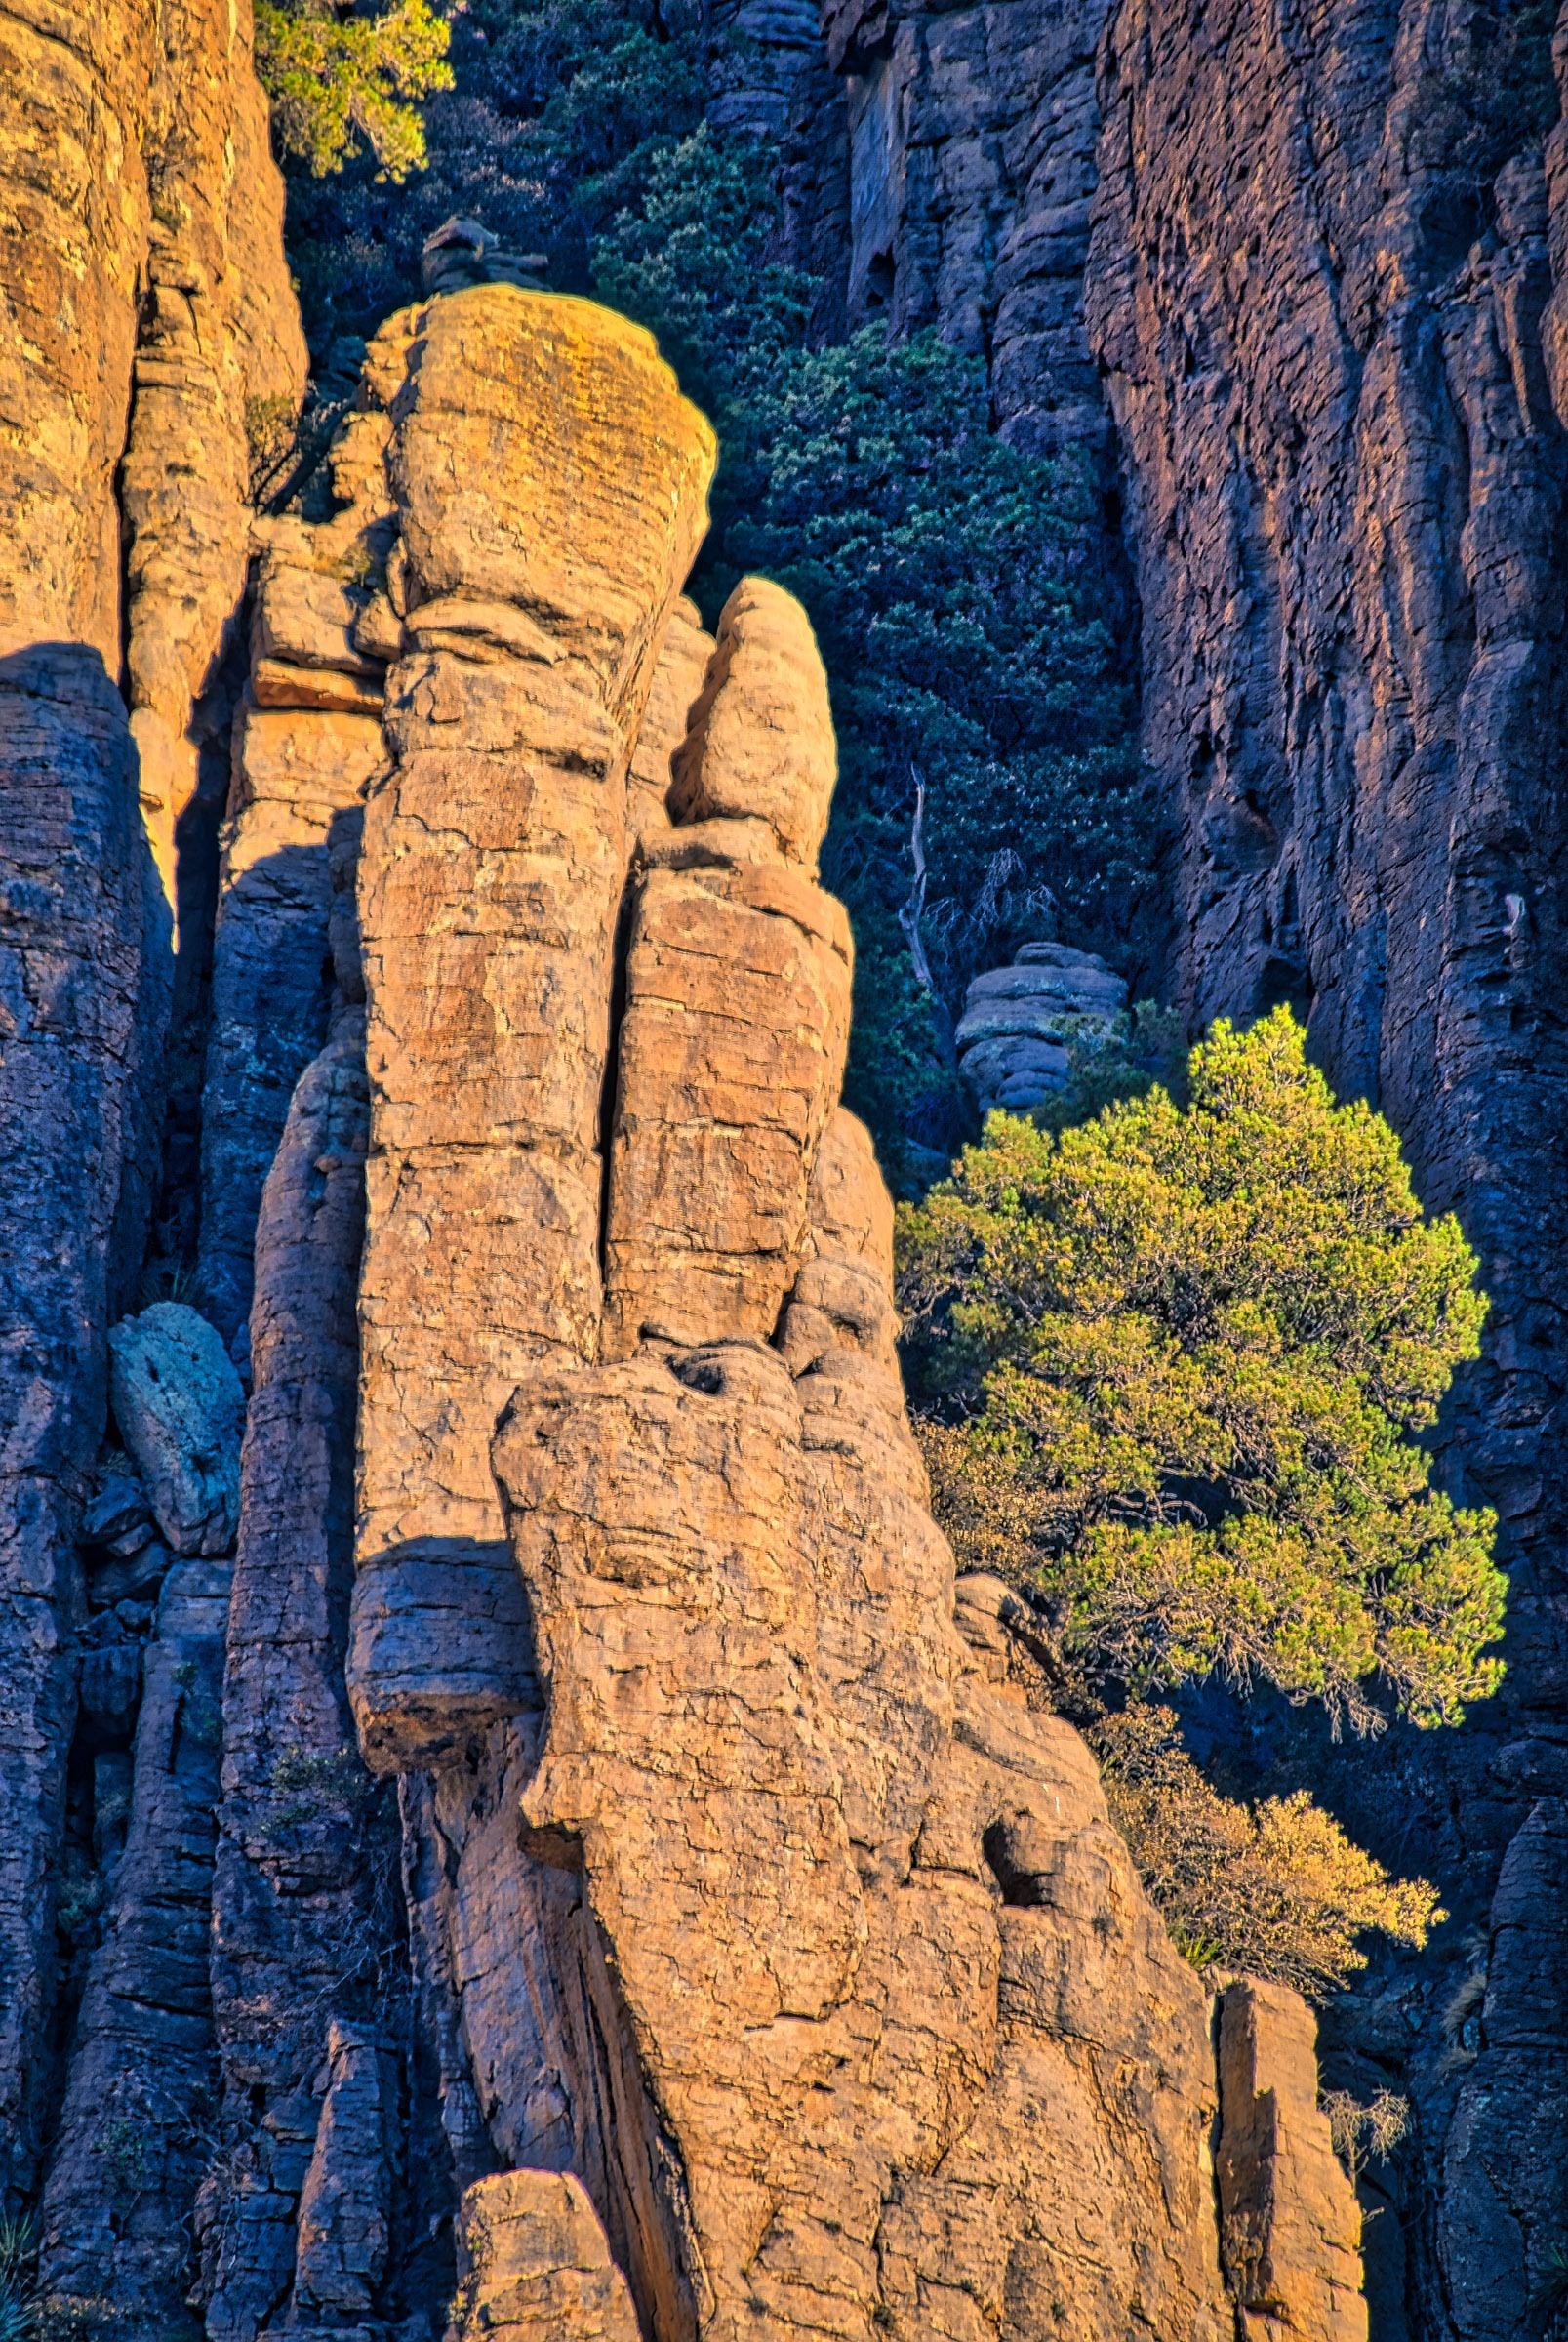 Rock structure of the Organ Pipe Formation in Chiricahua National Monument. The columns are formed of Rhyolite Canyon Tuff.